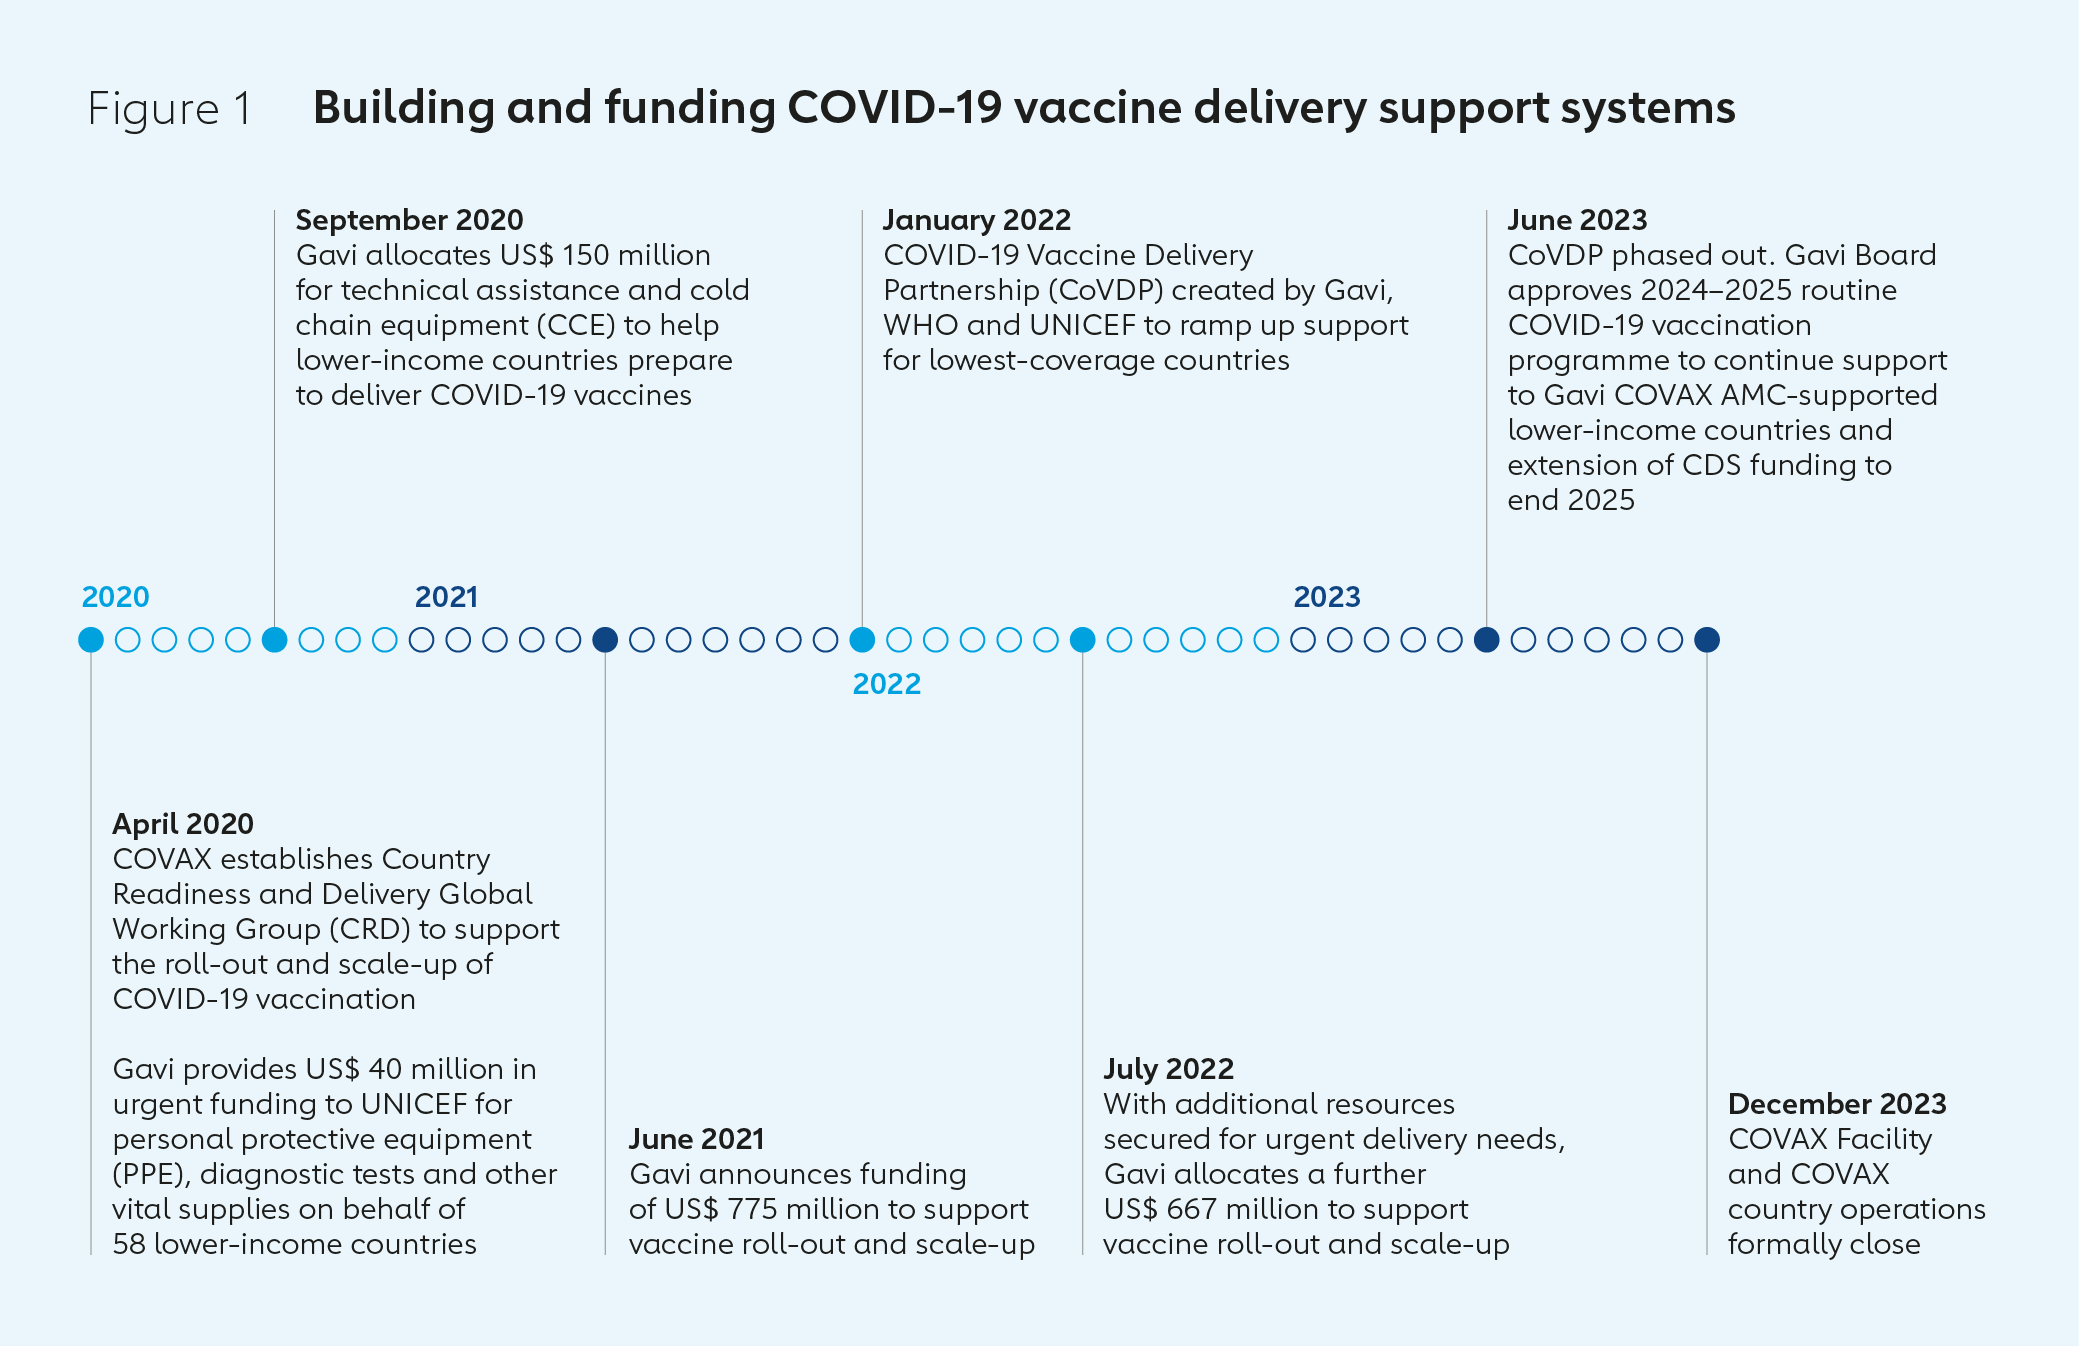 Building and funding COVID-19 vaccine delivery support systems